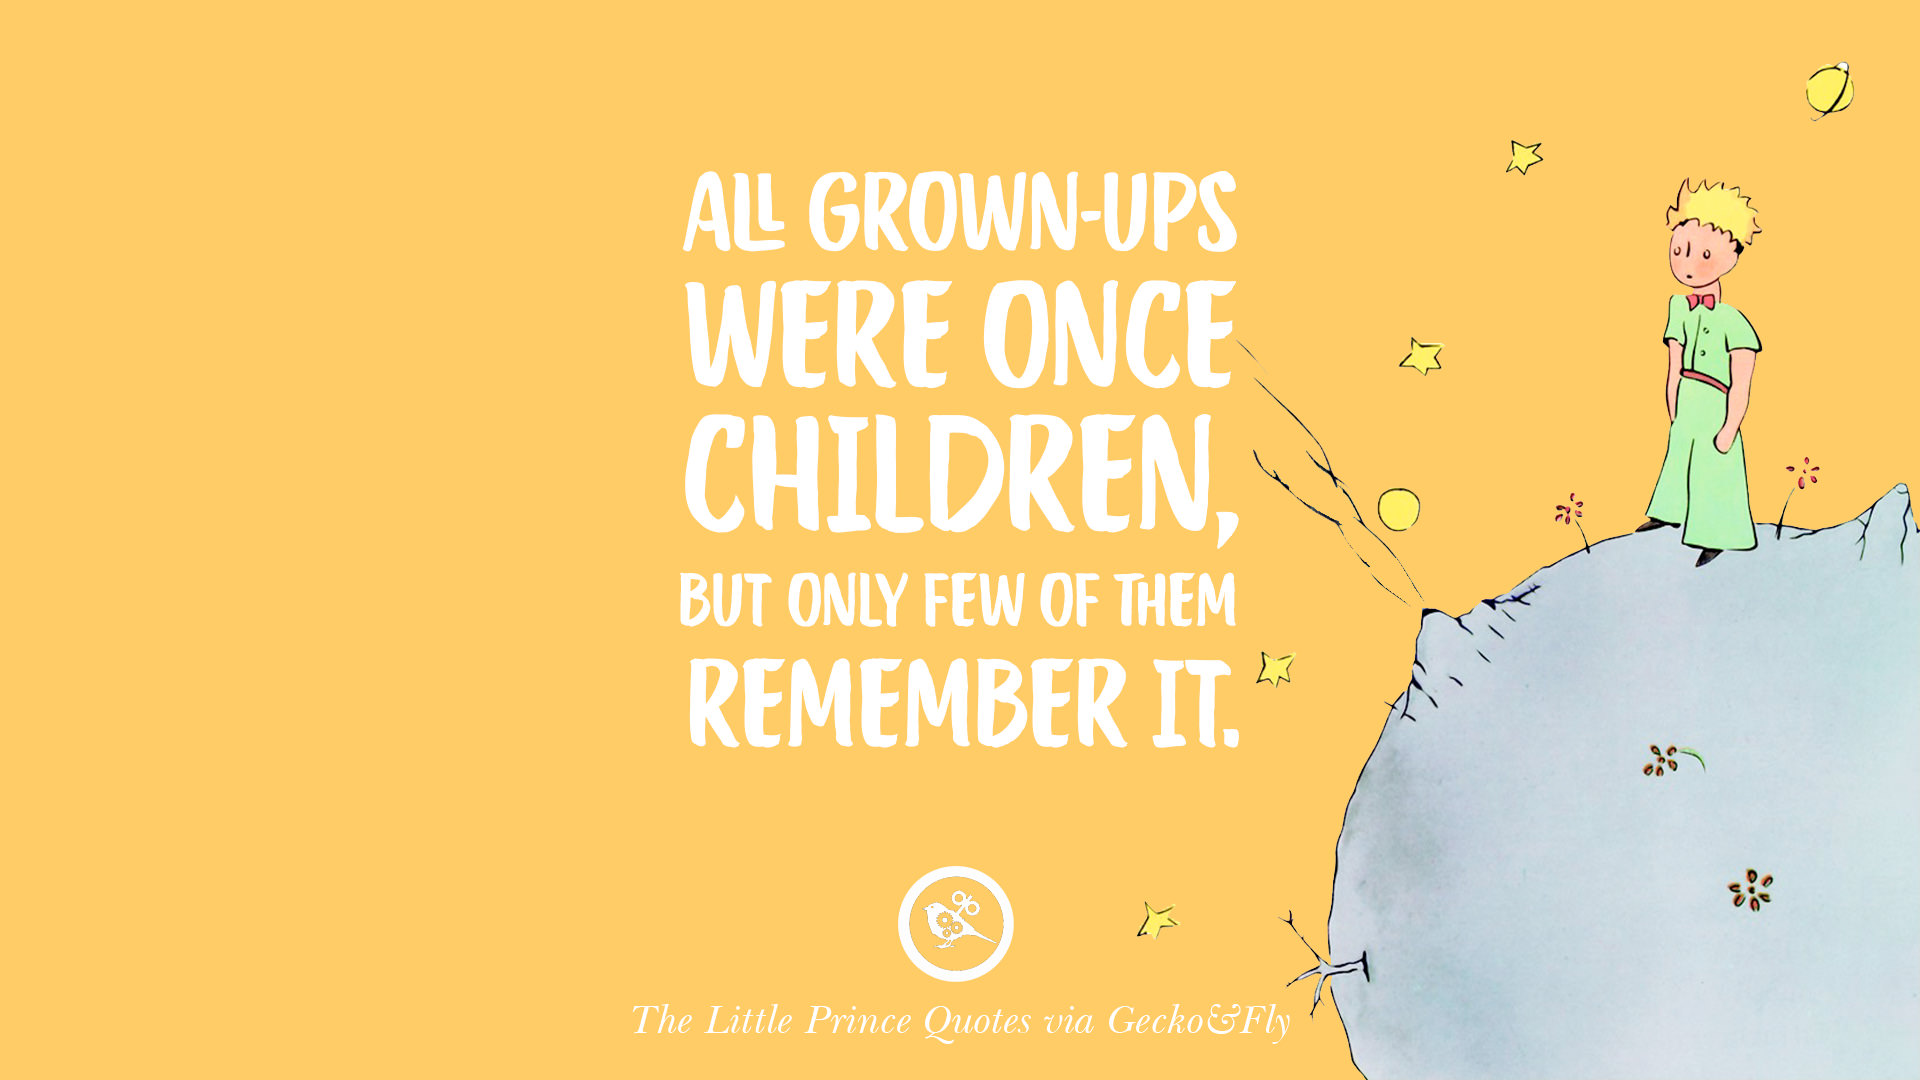 12 Quotes By The Little Prince On Life Lesson, True Love, And